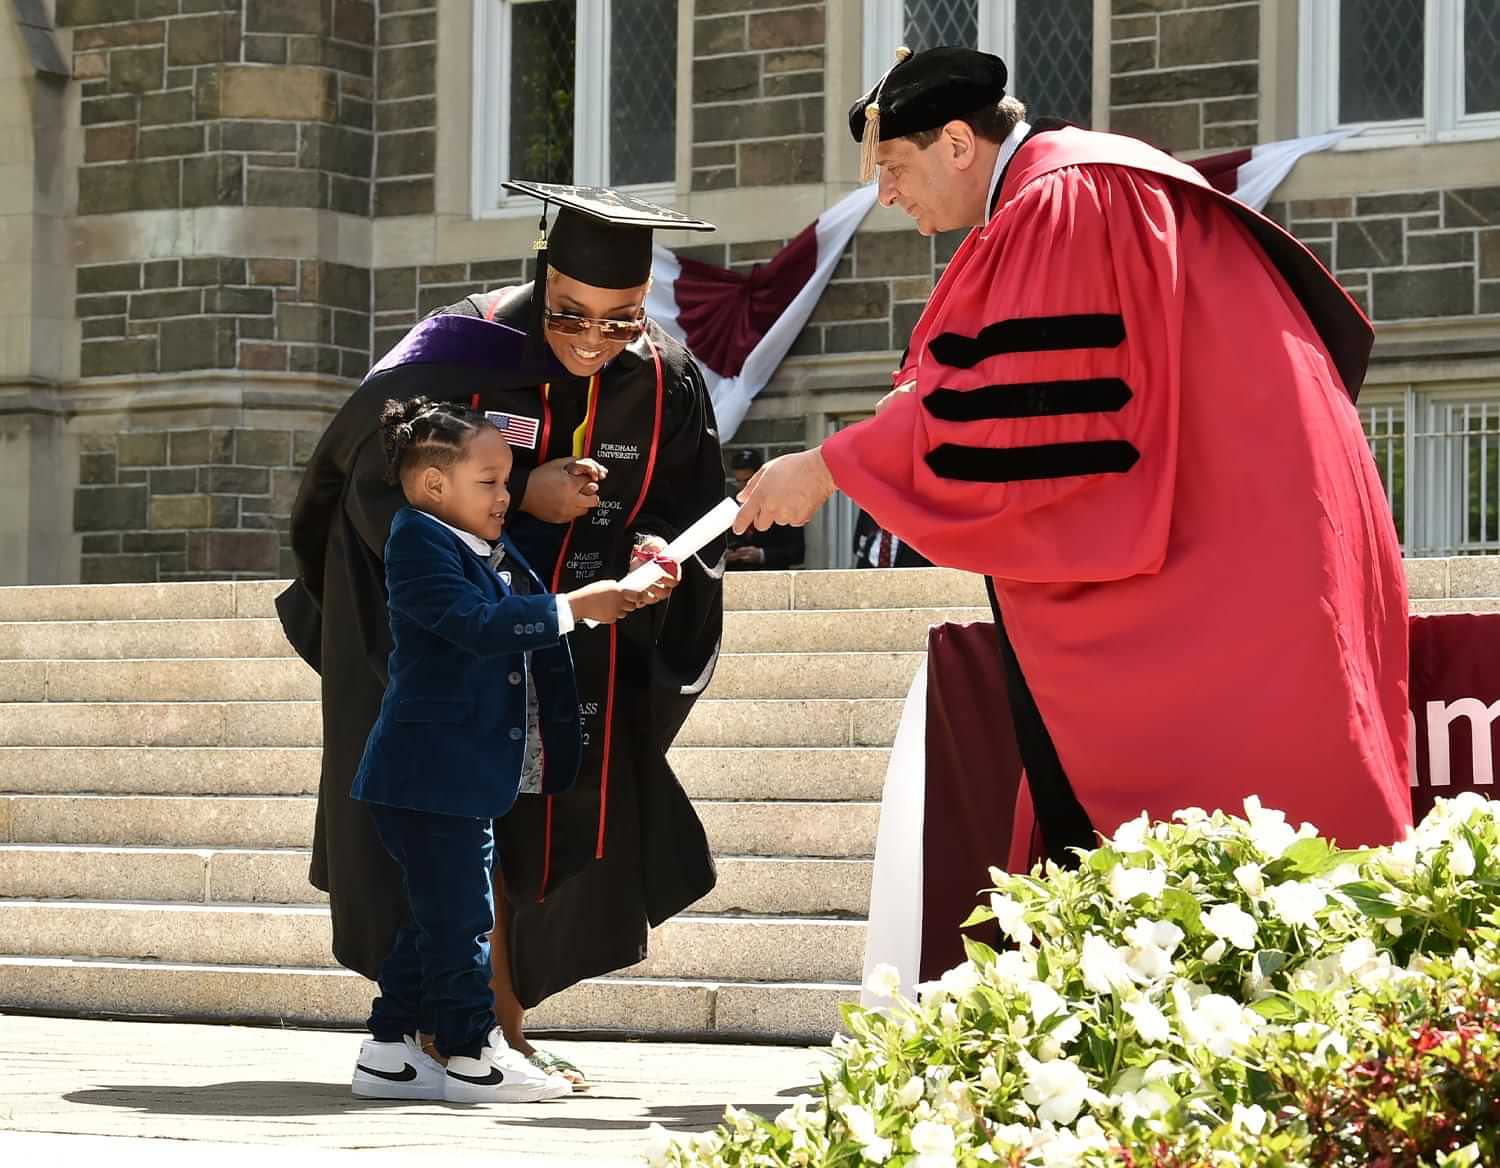 the dean hands a small child a ribbon tied diploma on stage